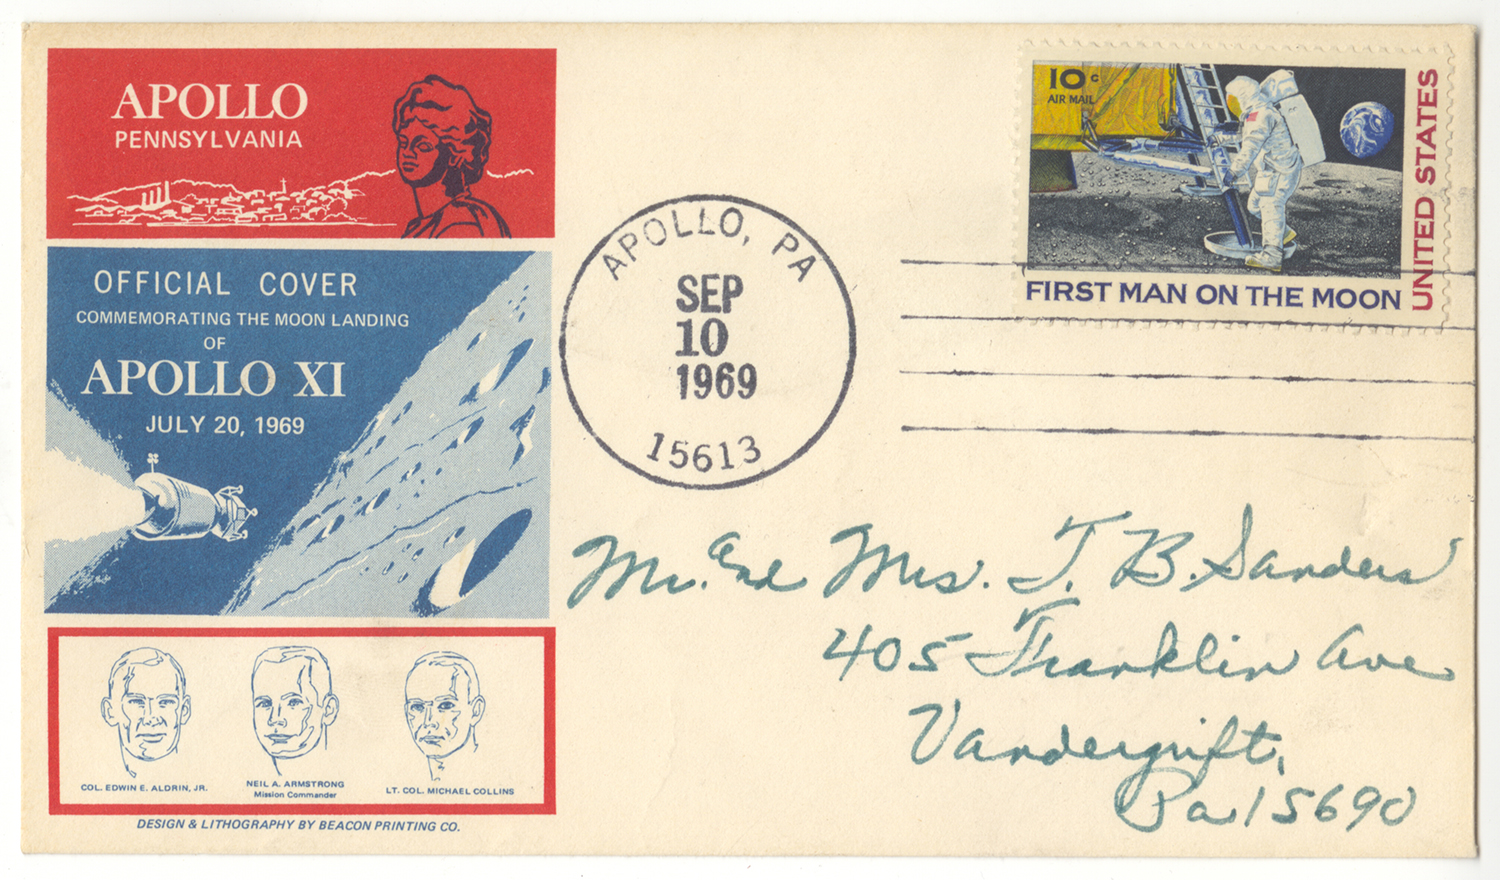 "First Man on the Moon" commemorative stamp, 1969.